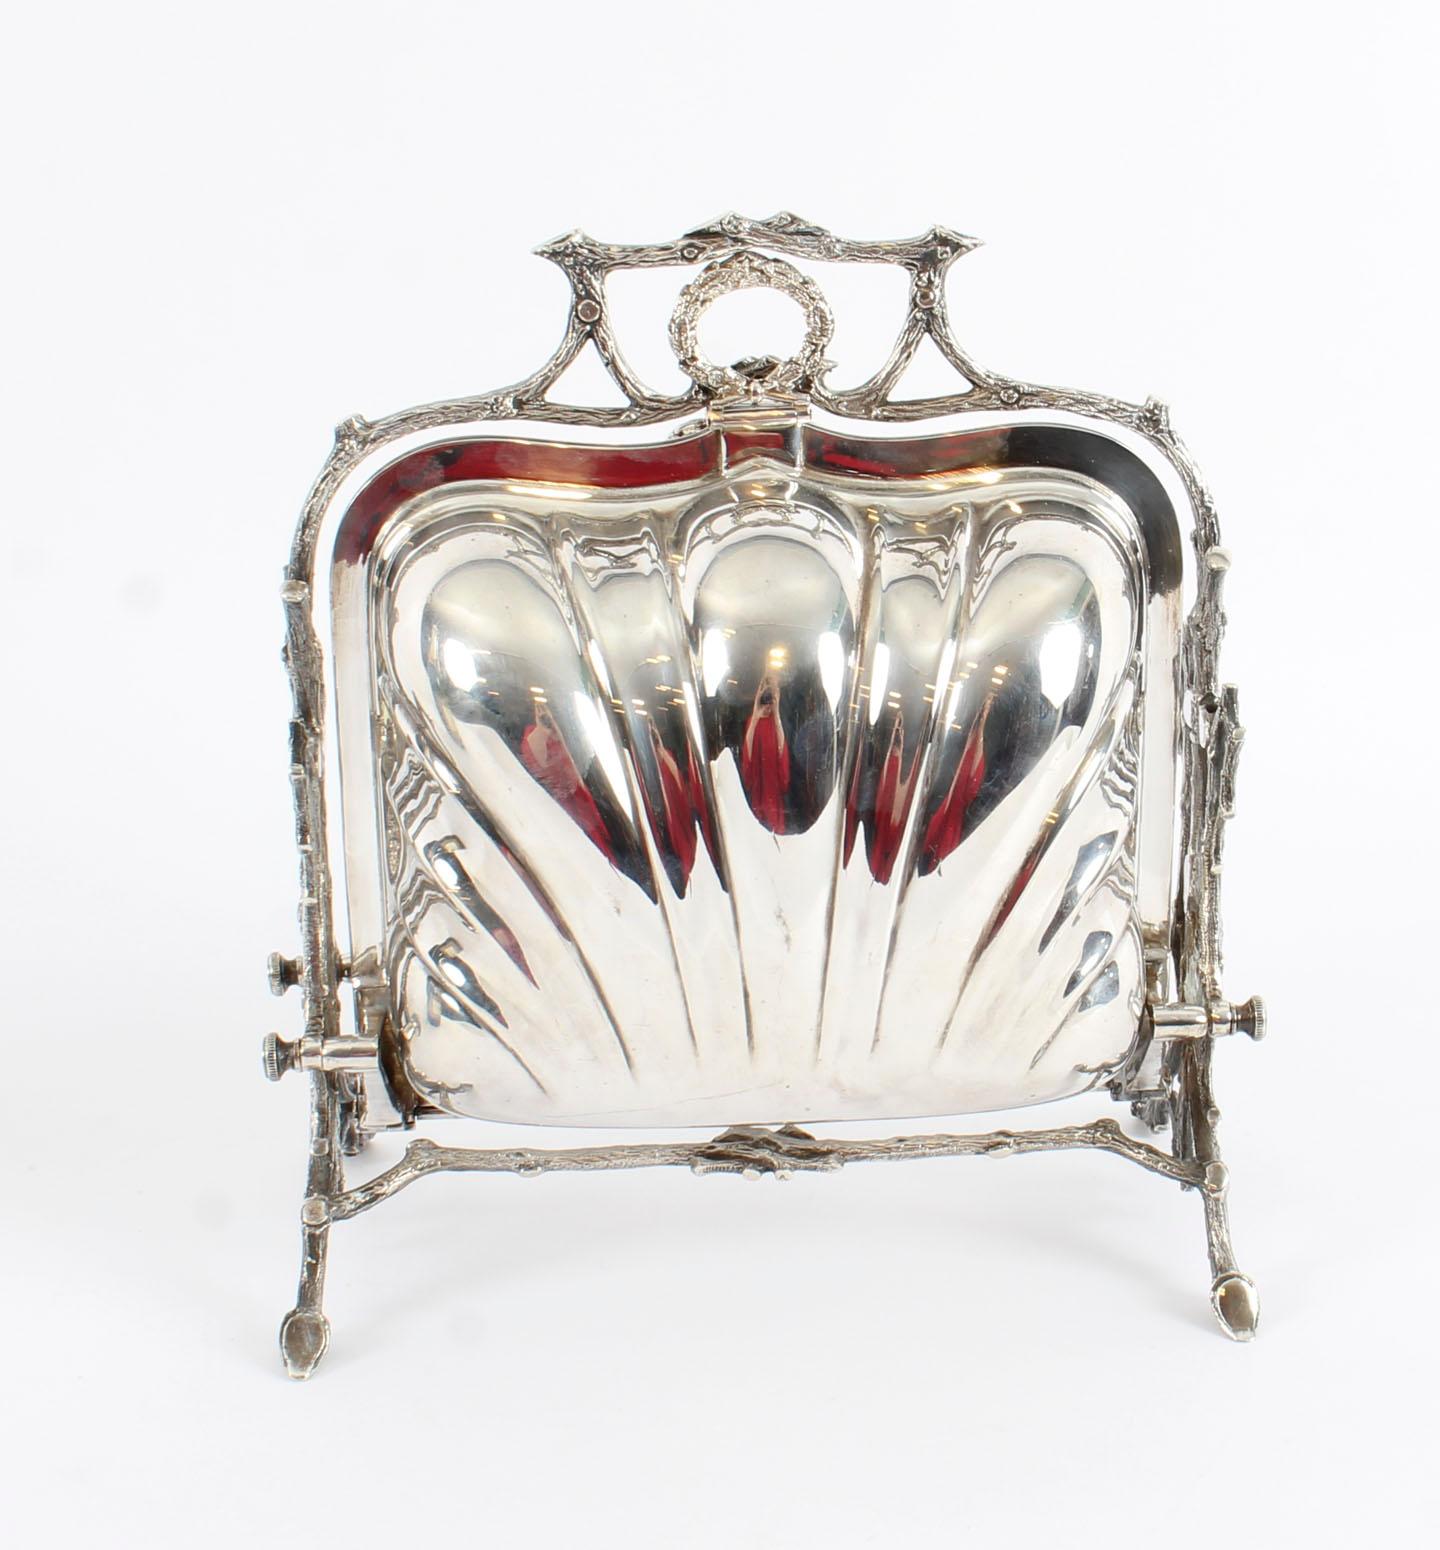 This is a beautiful antique Victorian silver plated folding biscuit box, the base bearing the makers mark of the renowned retailer Elkington & Co of Birmingham, circa 1870 in date.
 
It has a shaped shell shaped body sitting in a cast frame in the